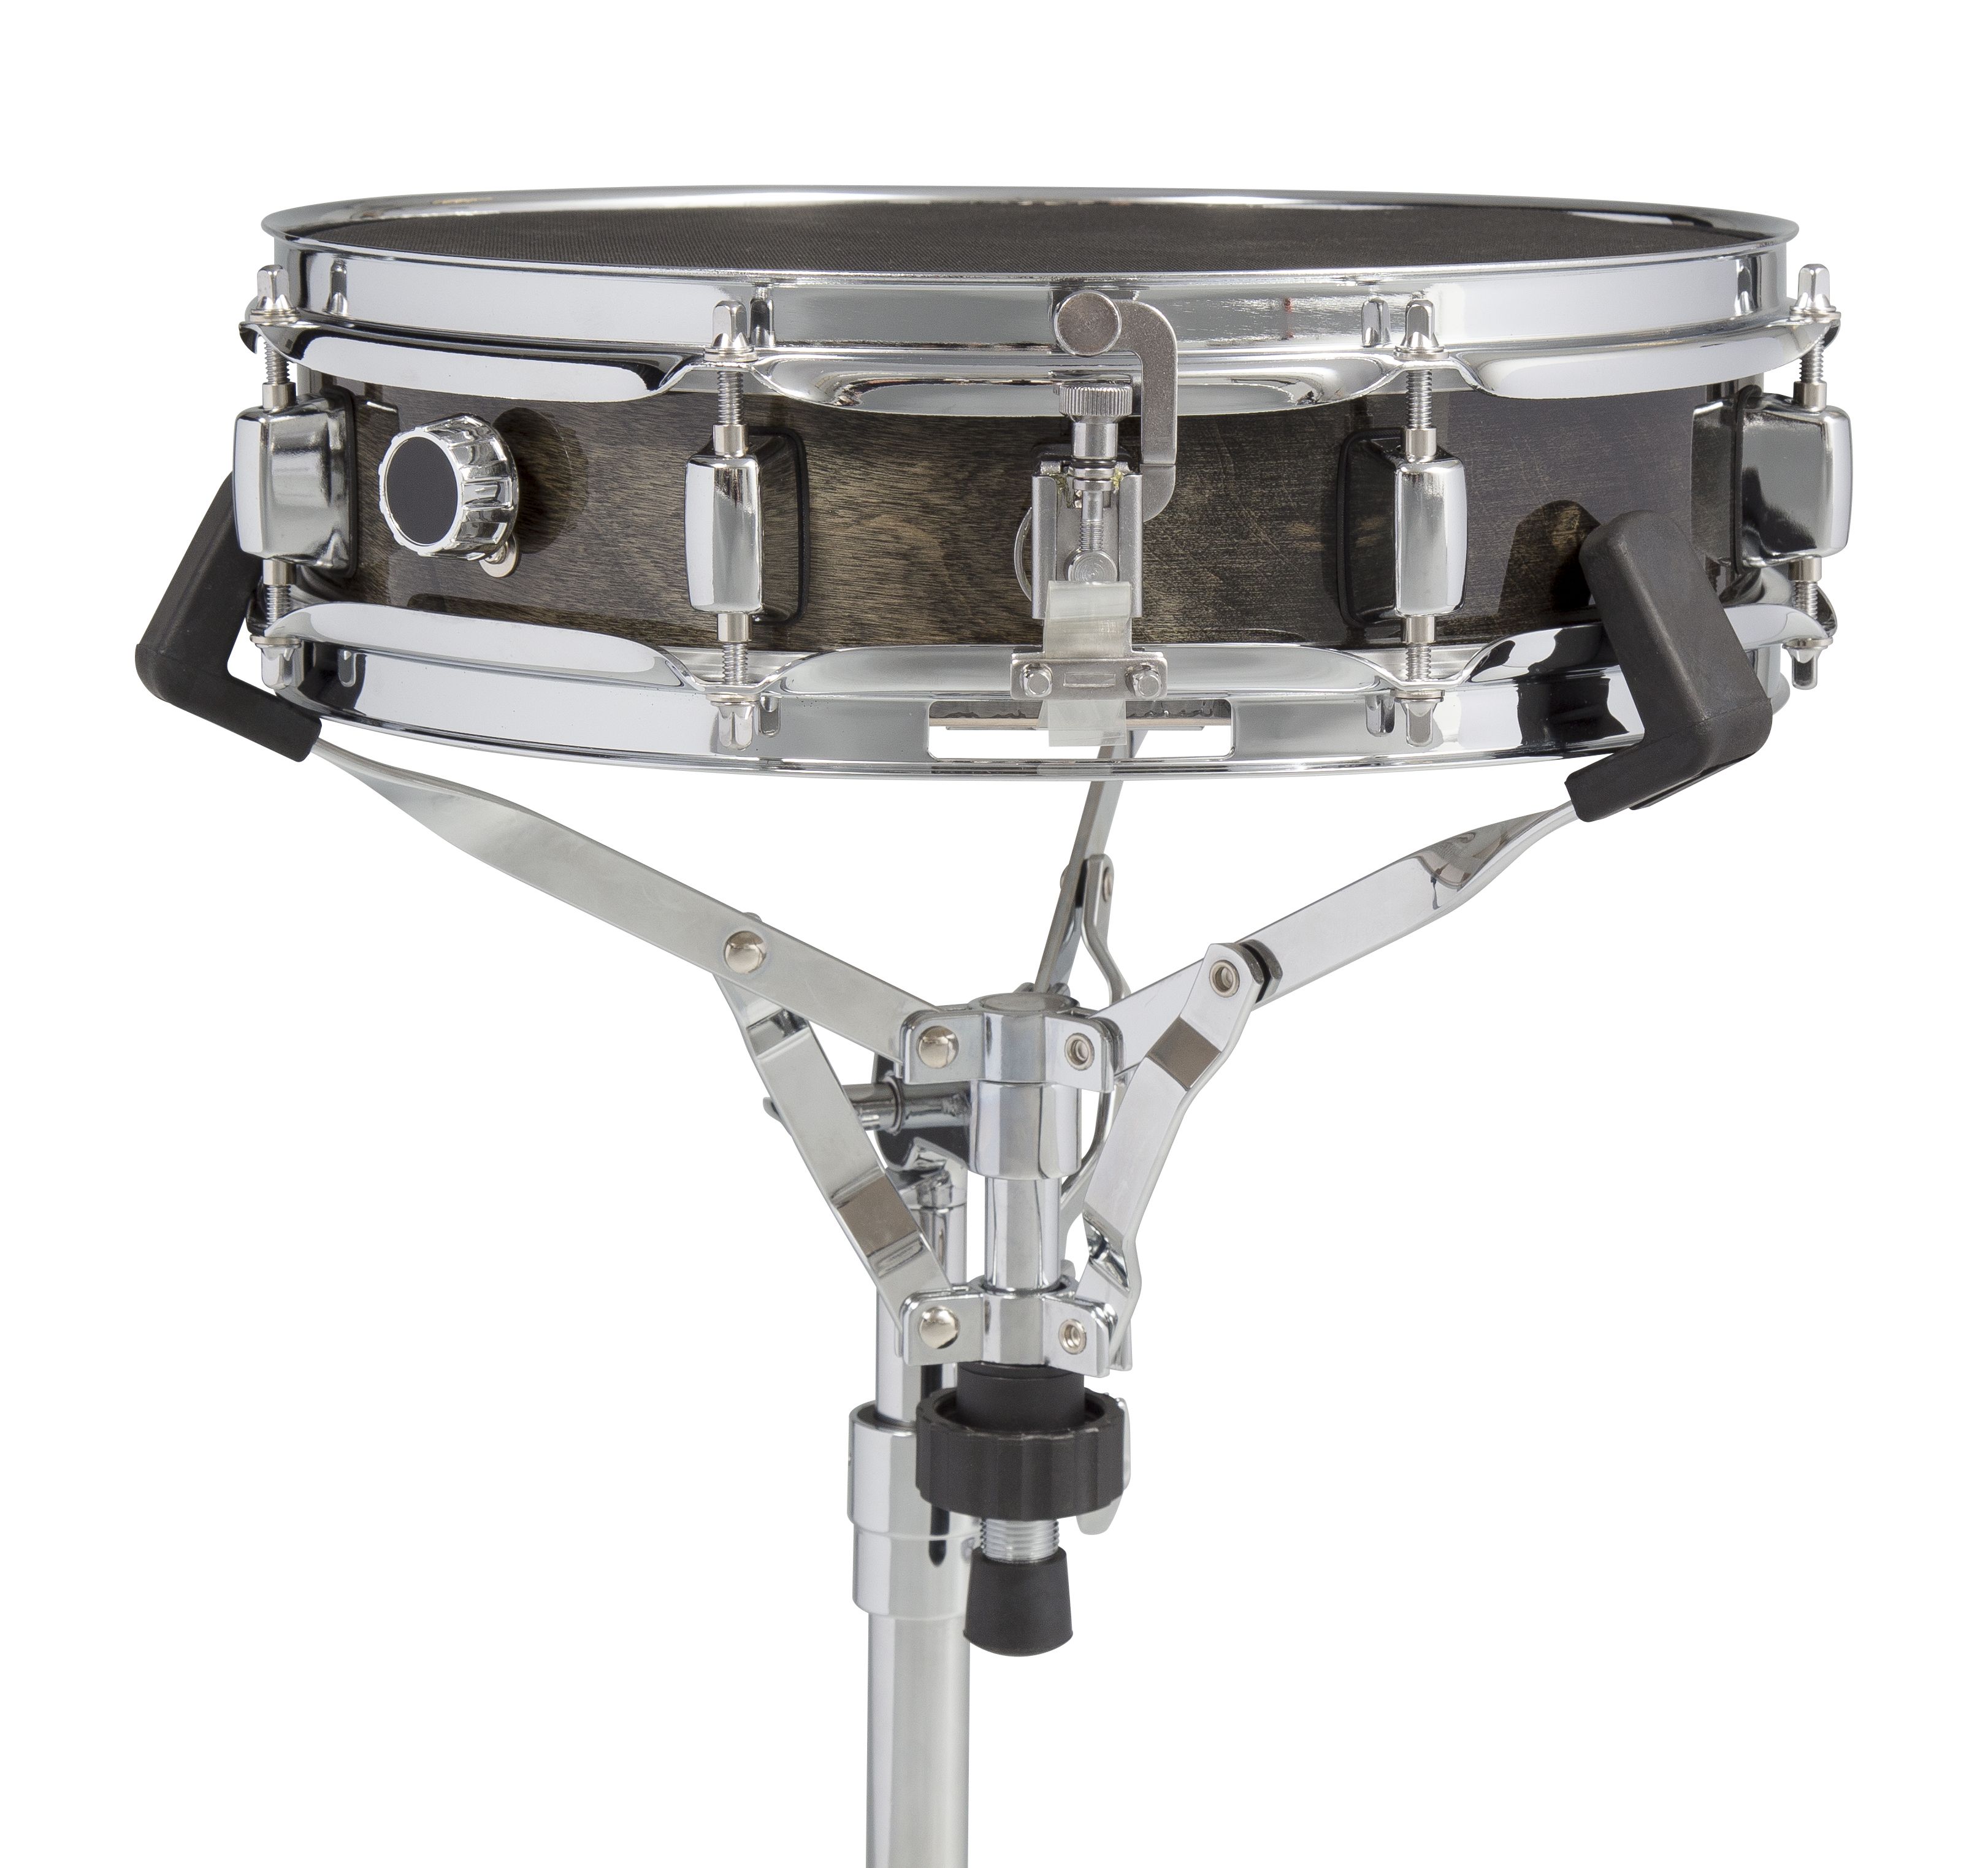 SK-285 / SK-285R - Overview - Total Percussion - Percussion ...